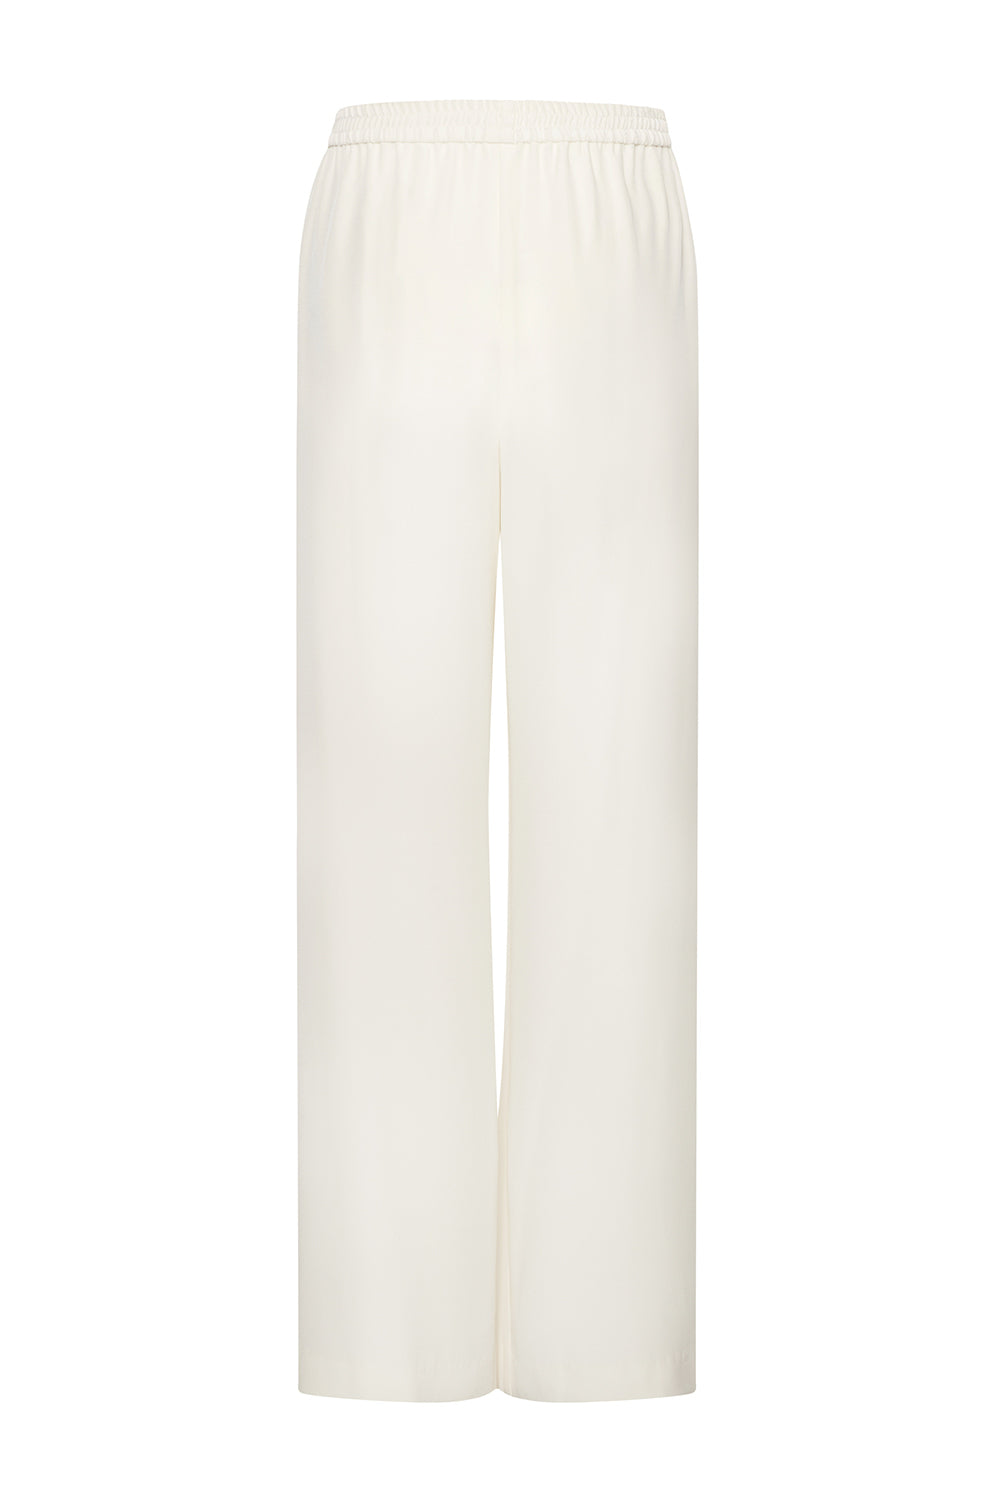 Genevieve Trouser in Ivory